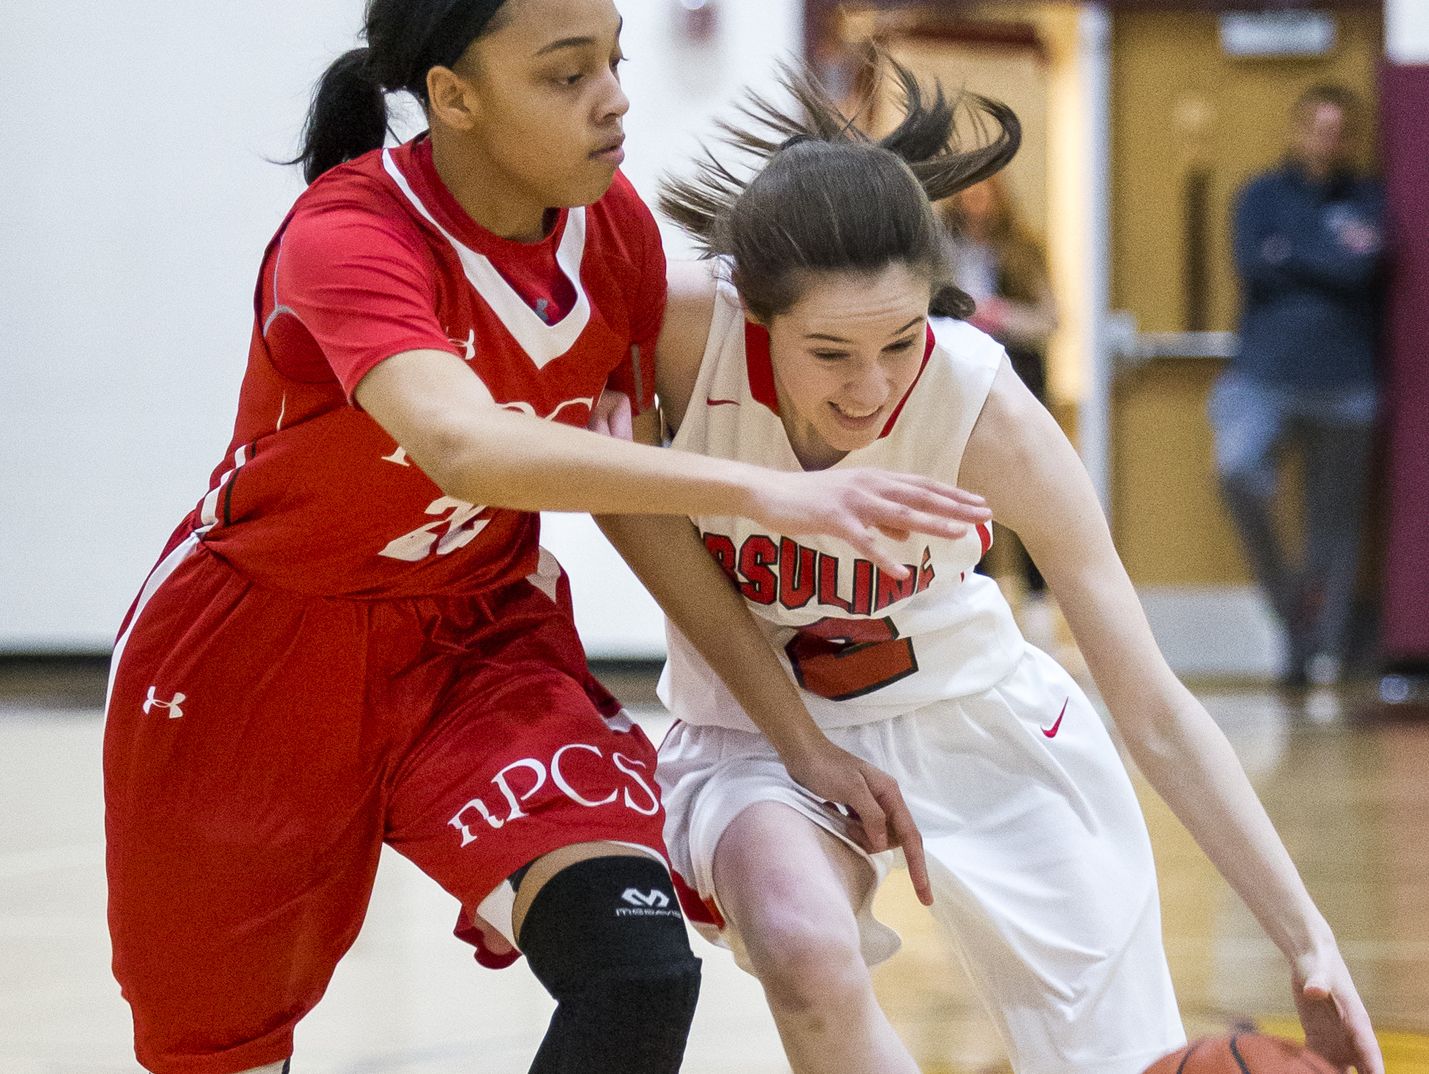 Ursuline's Maggie Connolly drives to the basket against Roland Park's Aniyah Carpenter in the first half of Ursuline Academy's 47-40 win over Roland Park Country School in the Diamond State Classic at St. Elizabeth High School in Wilmington on Friday evening.